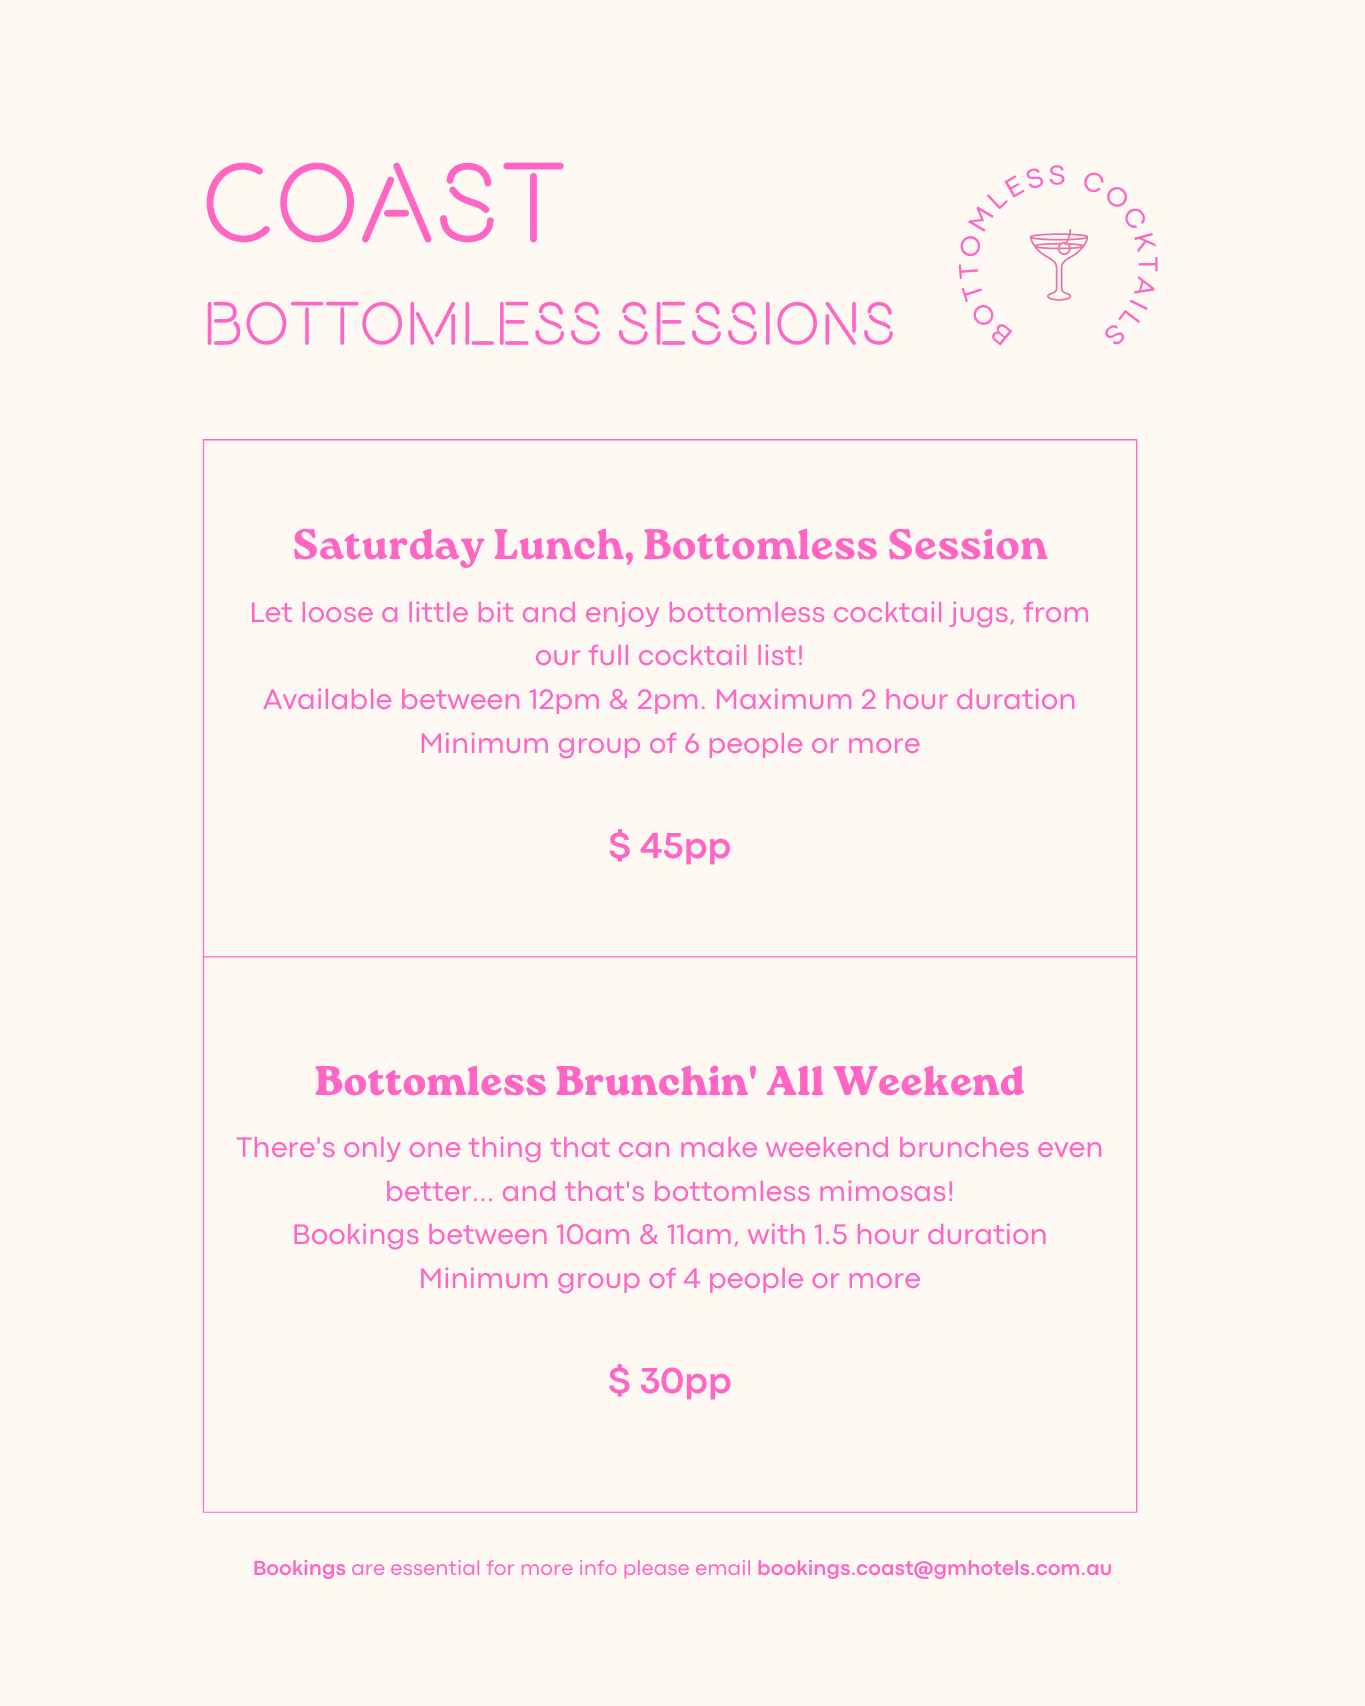 COAST BOTTOMLESS SESSIONS